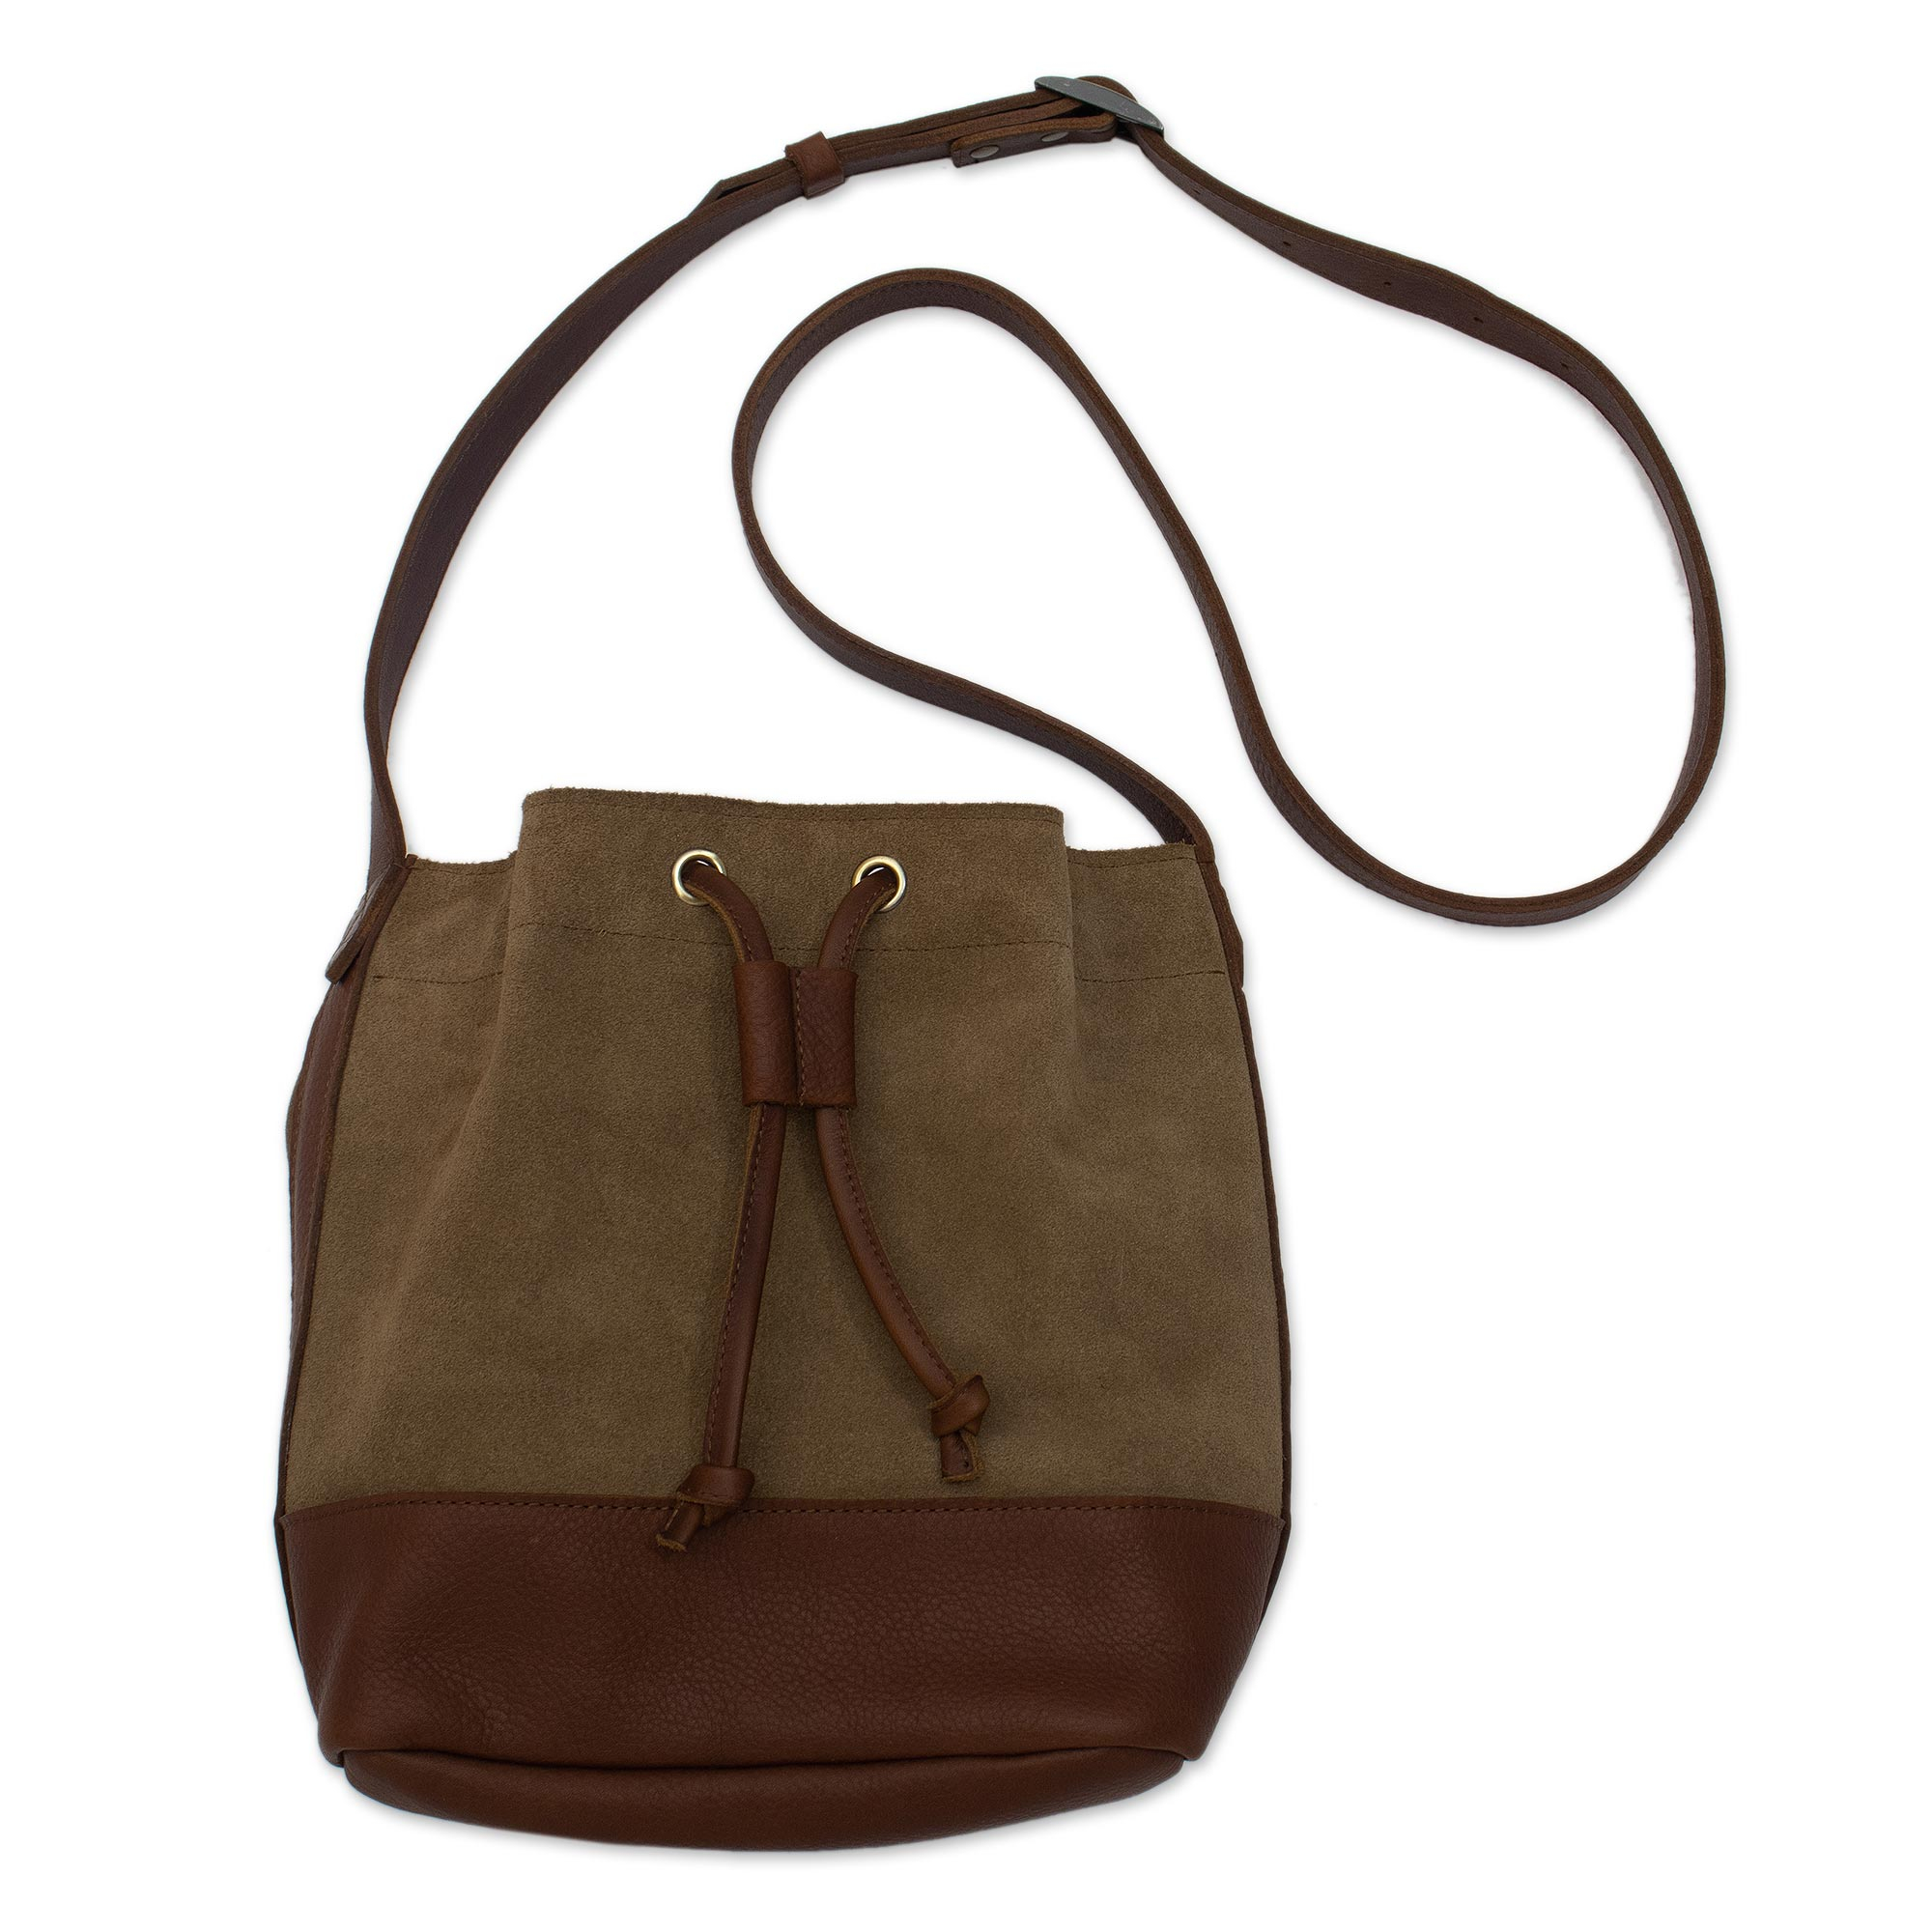 UNICEF Market  Bucket Bag in Suede and Leather - Boho Style in Brown